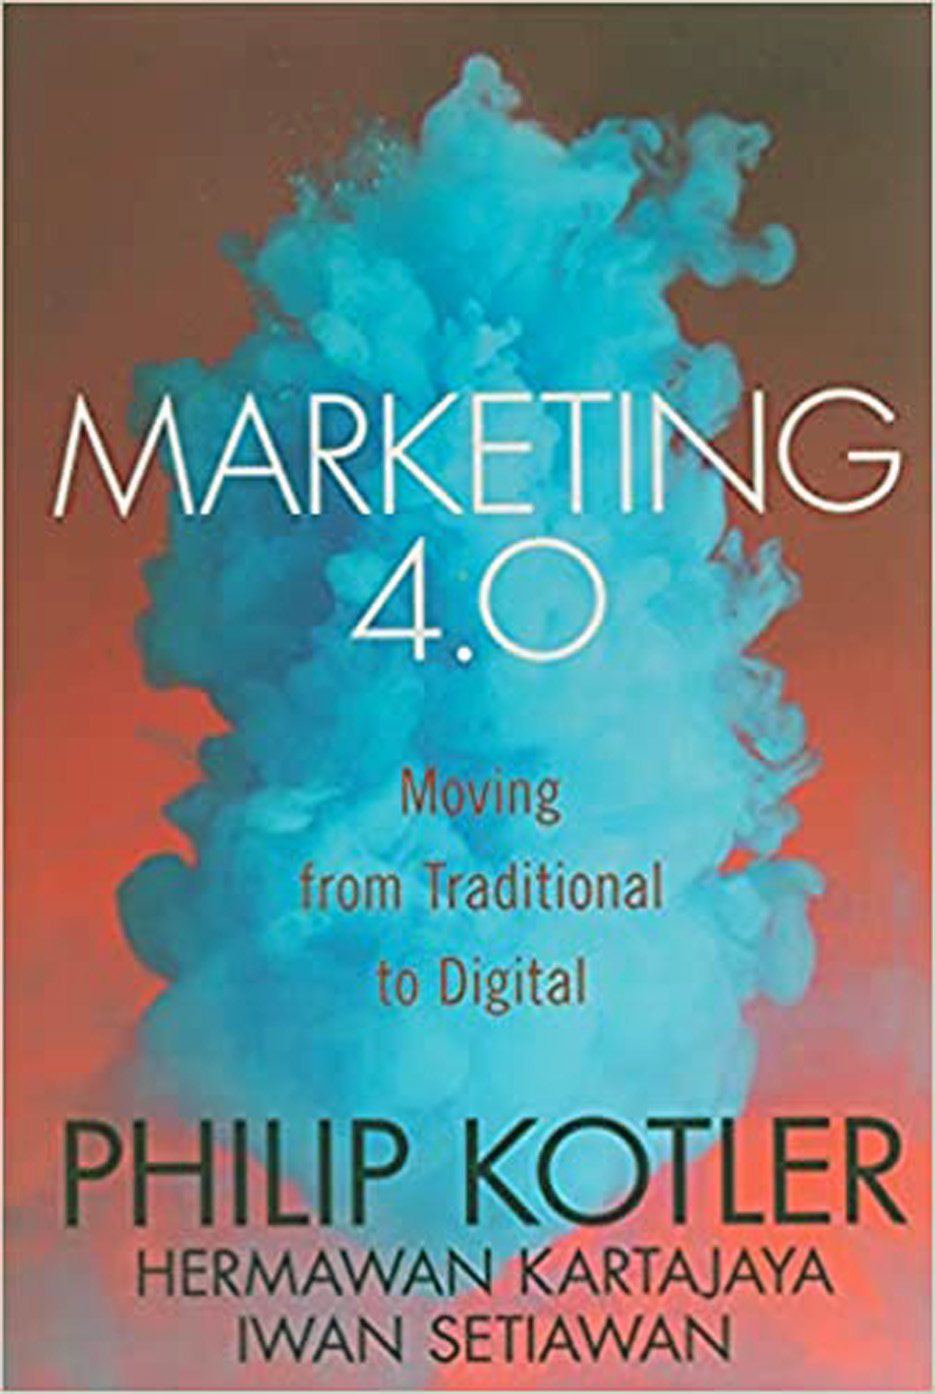 MARKETING 4.0: MOVING FROM TRADITIONAL TO DIGITAL